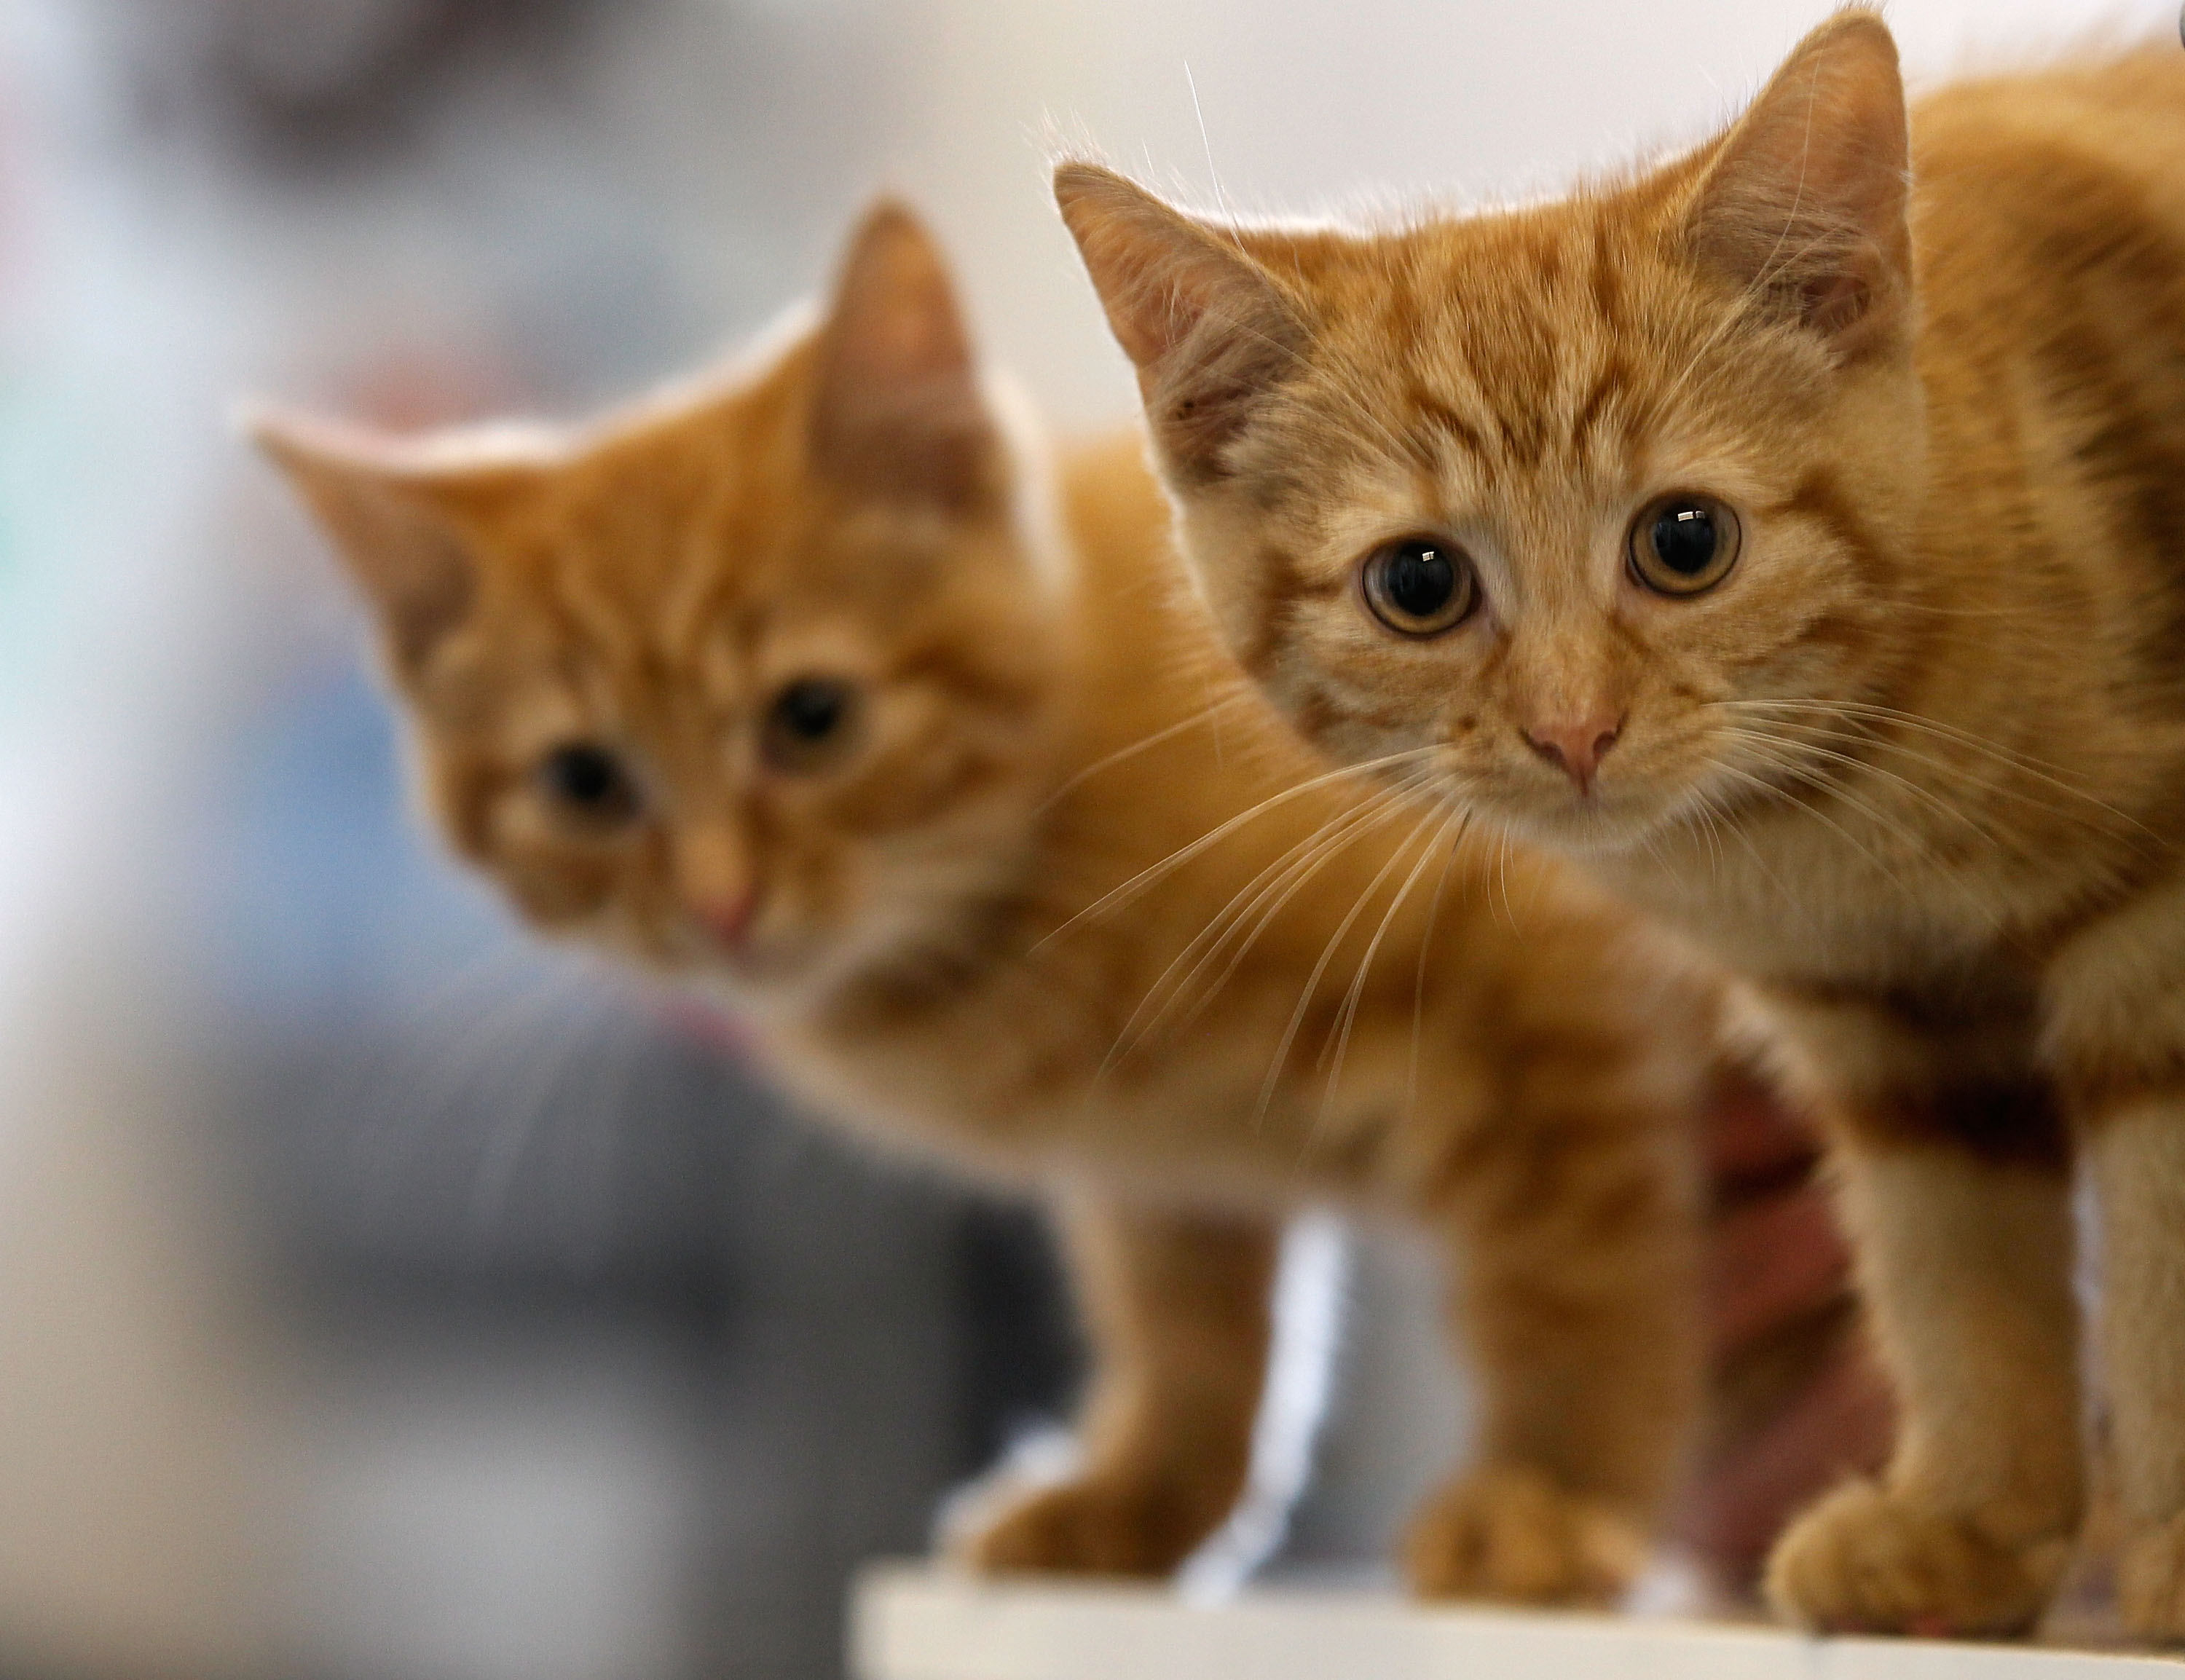 21 Maryland Shelters To Waive Adoption Fees For Cats, Kittens In July